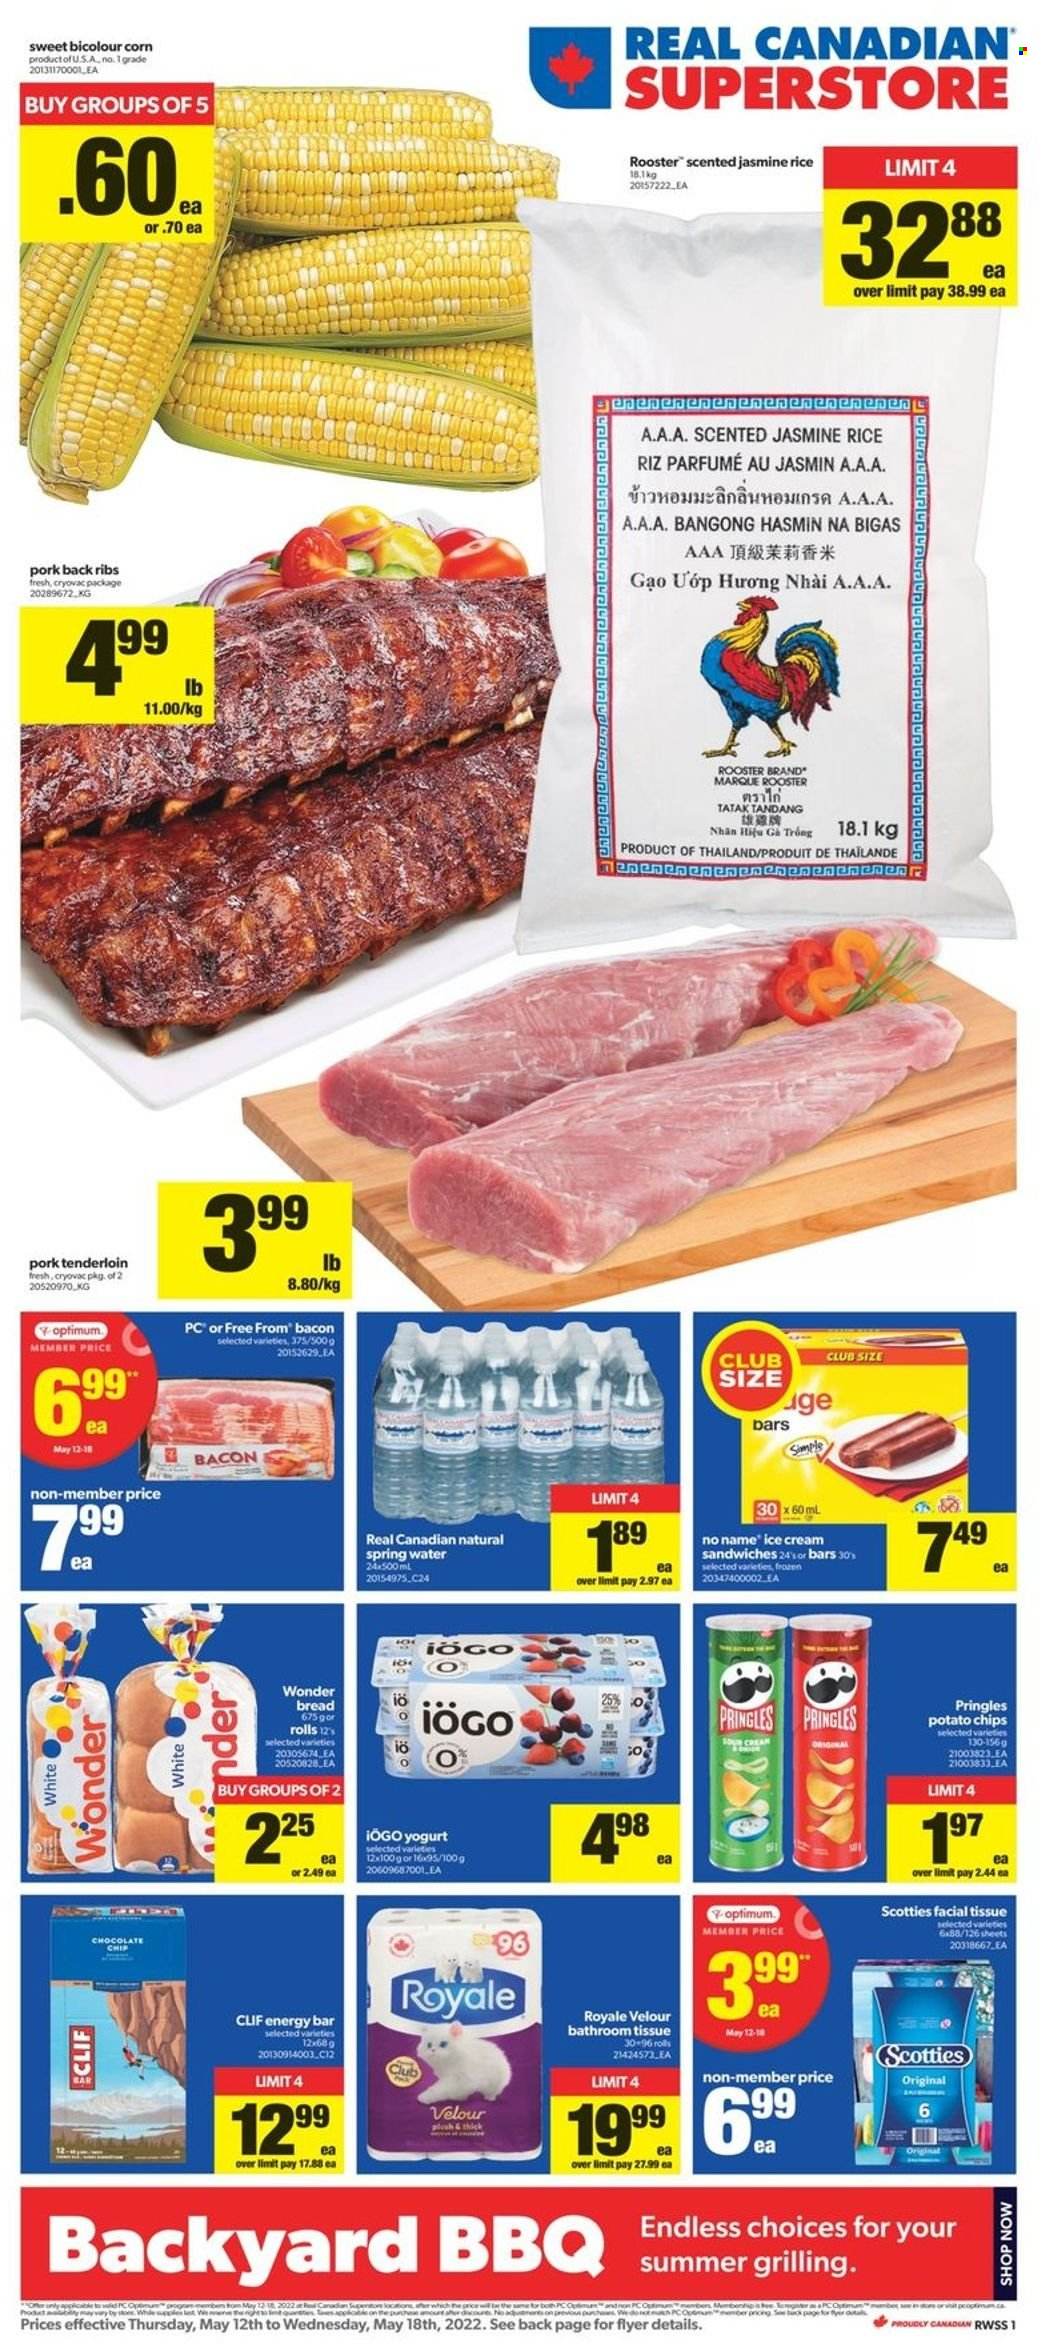 thumbnail - Circulaire Real Canadian Superstore - 12 Mai 2022 - 18 Mai 2022 - Produits soldés - bacon, chips, Pringles, riz. Page 1.